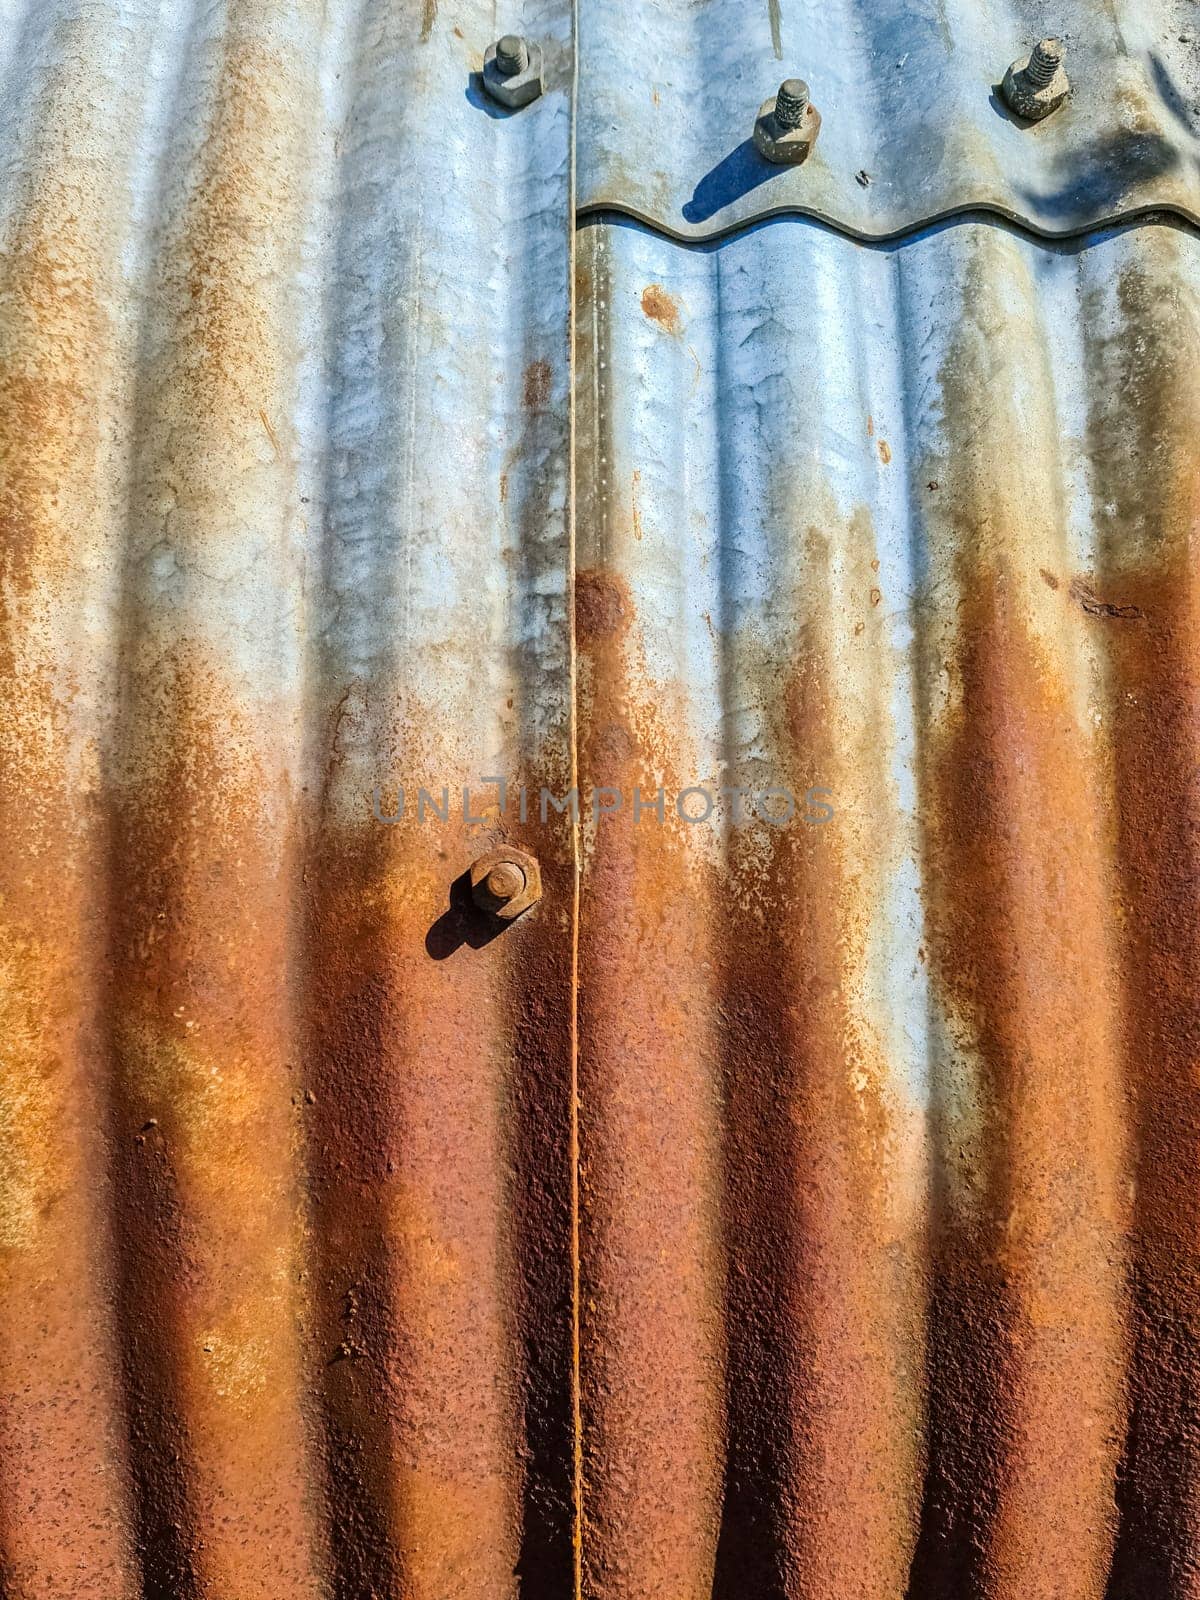 Surface of rusty metal and steel with lots of corrosion in high resolution.